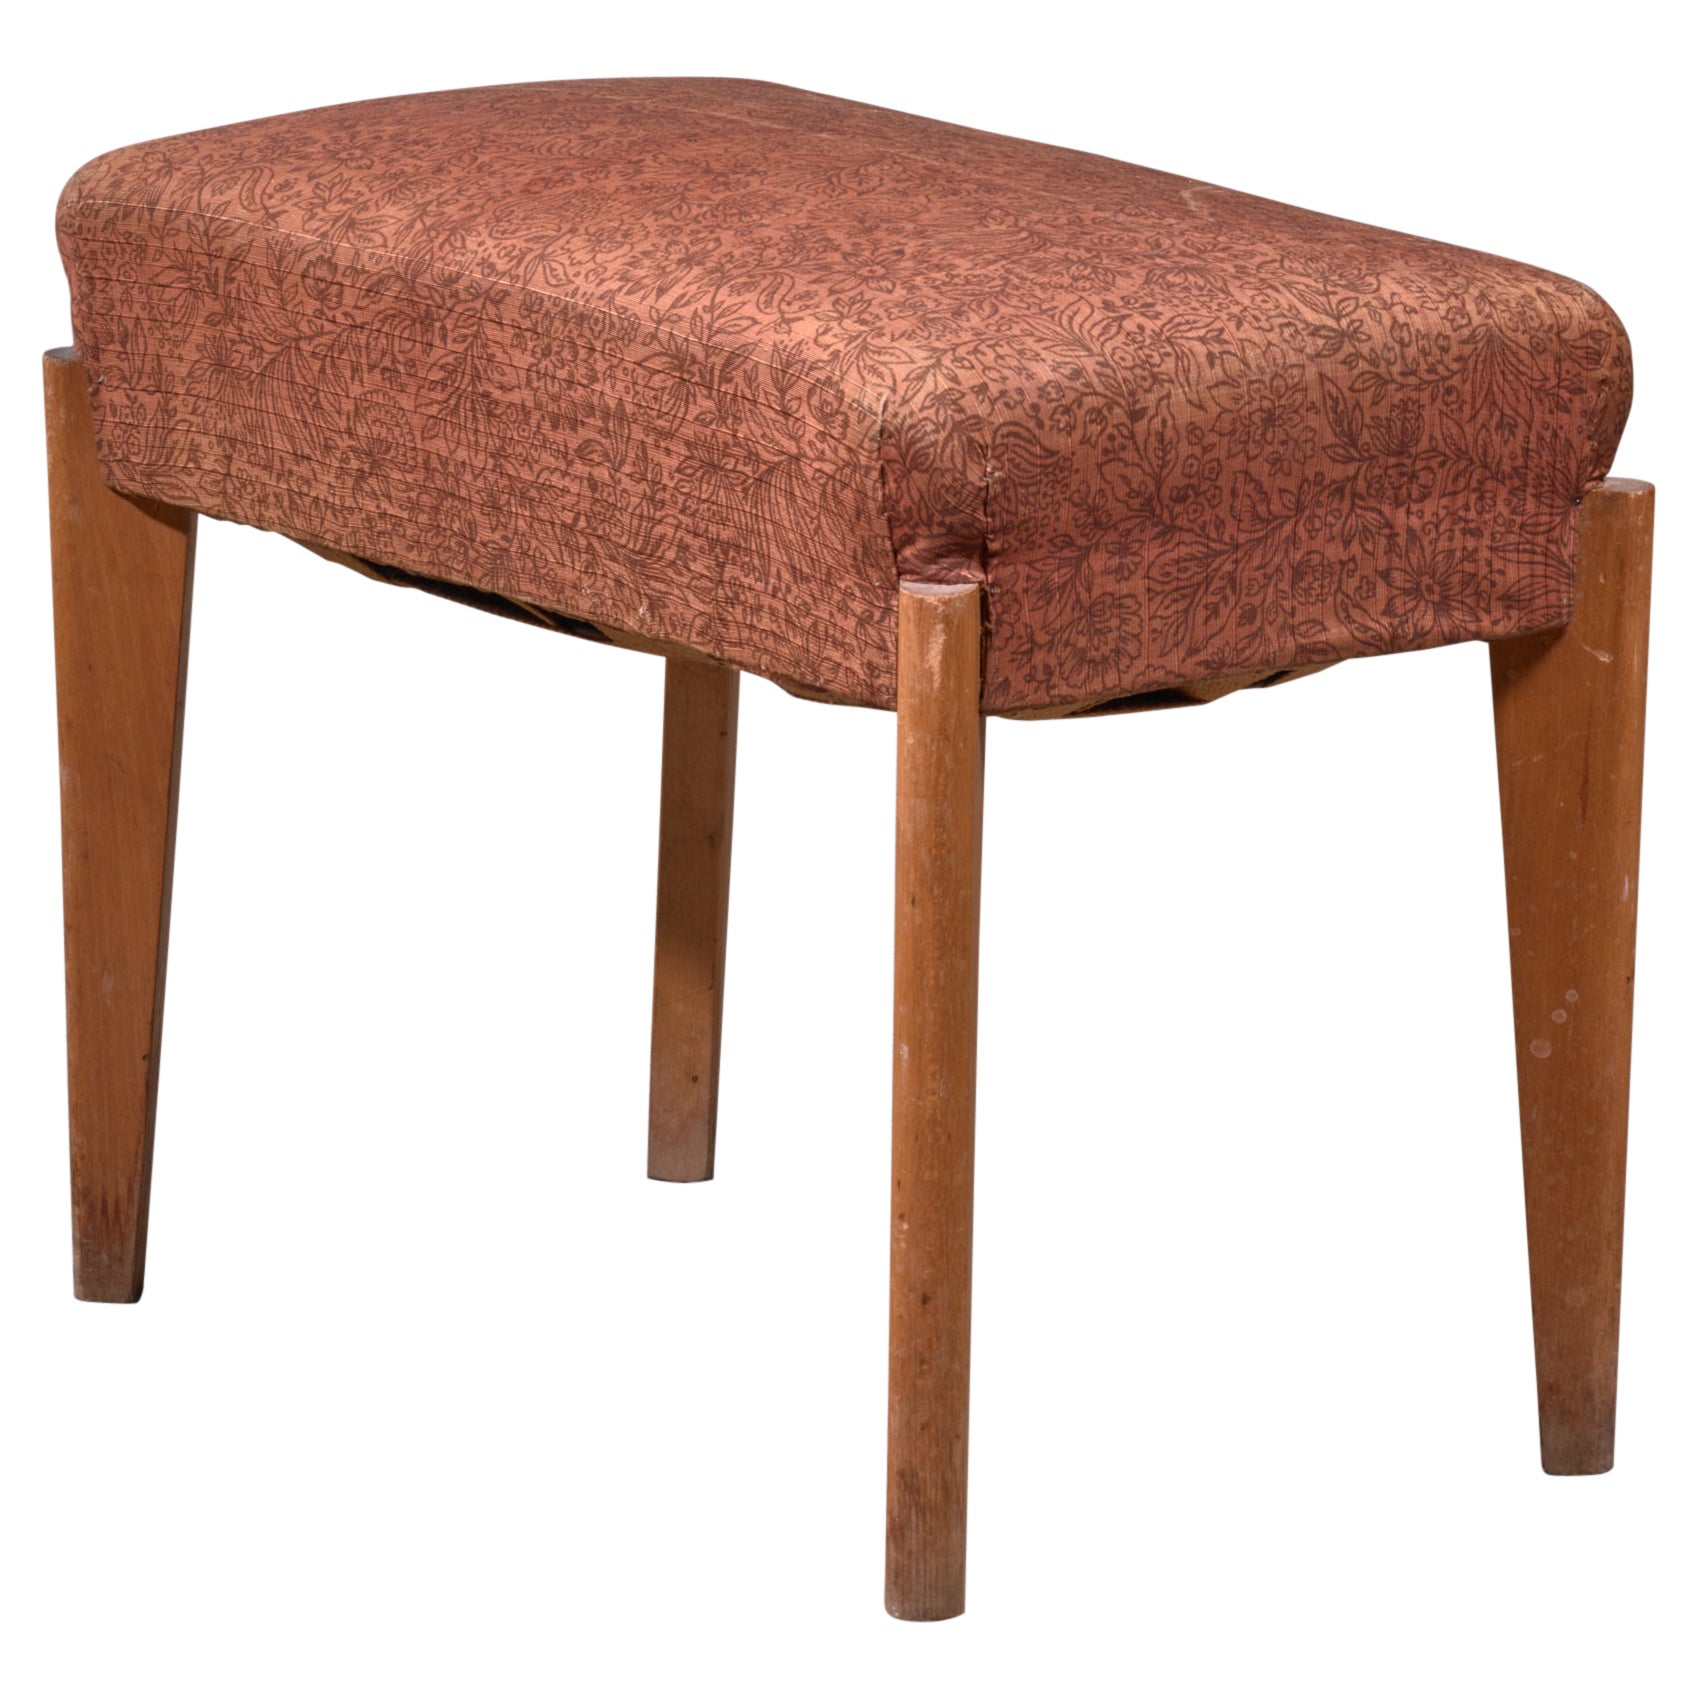 Oak Piano Stool or Ottoman with Thick Cushion For Sale